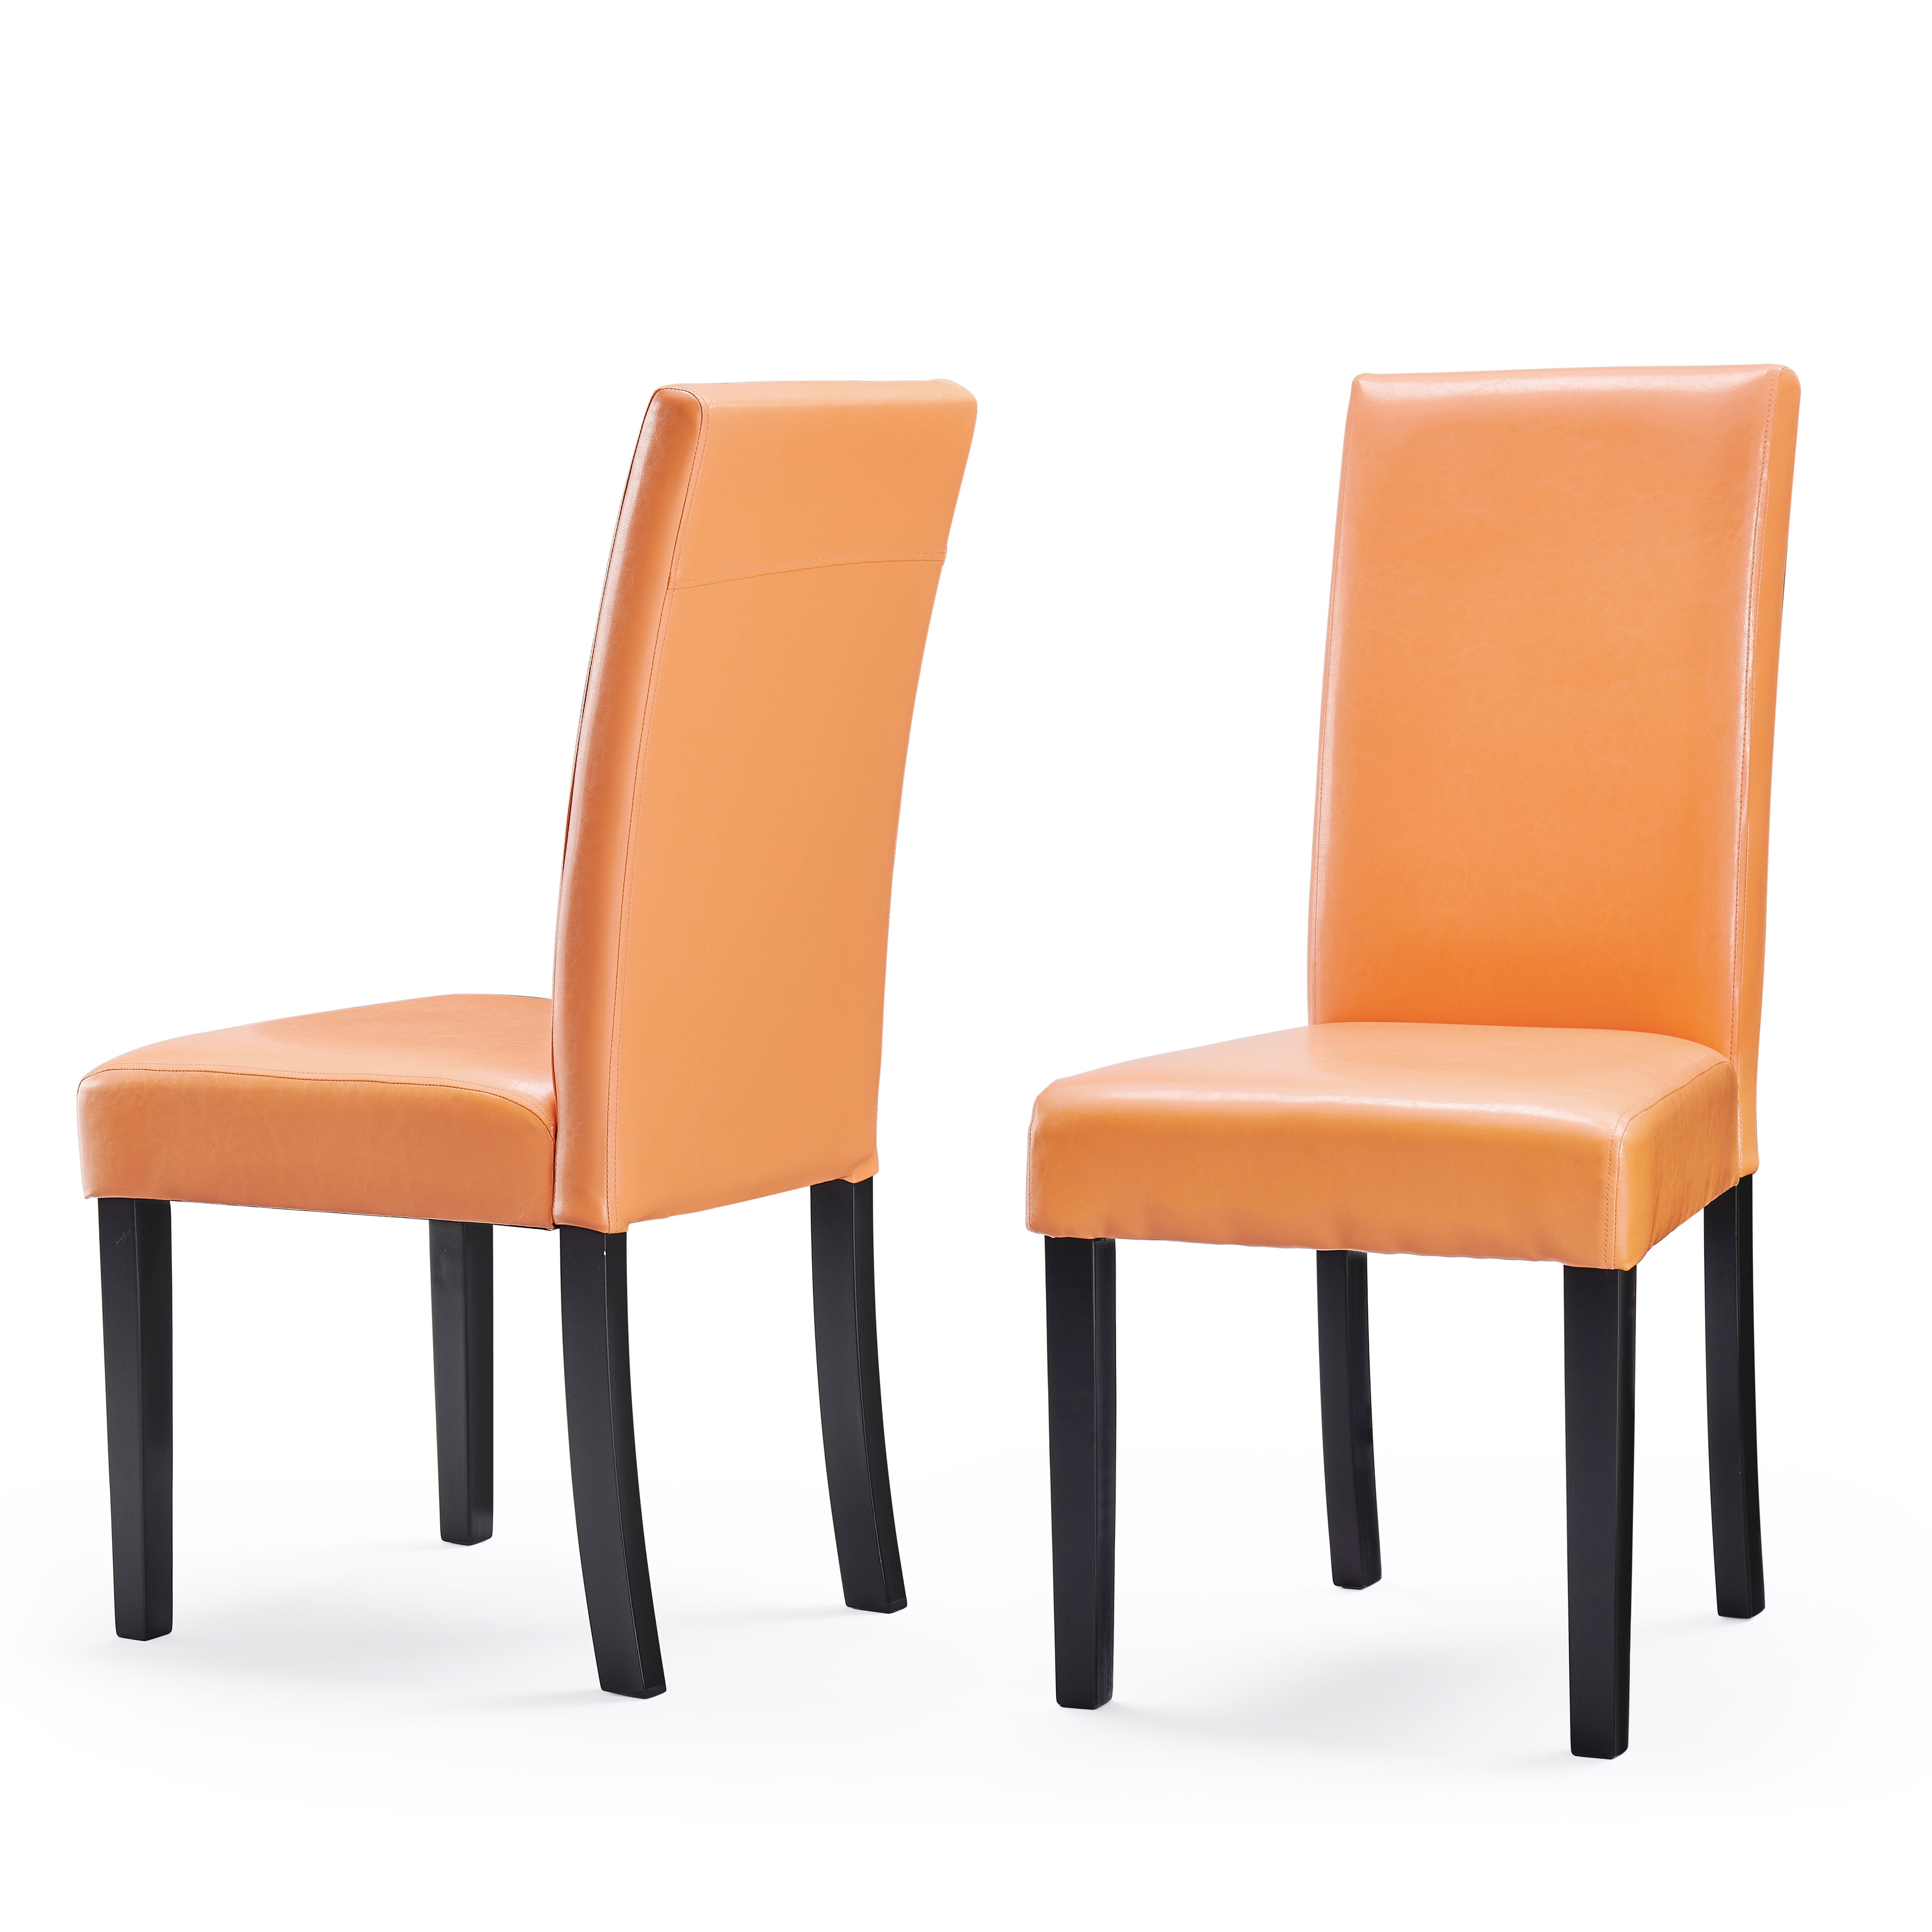 Villa Faux Leather Dining Chairs (Set of 2)